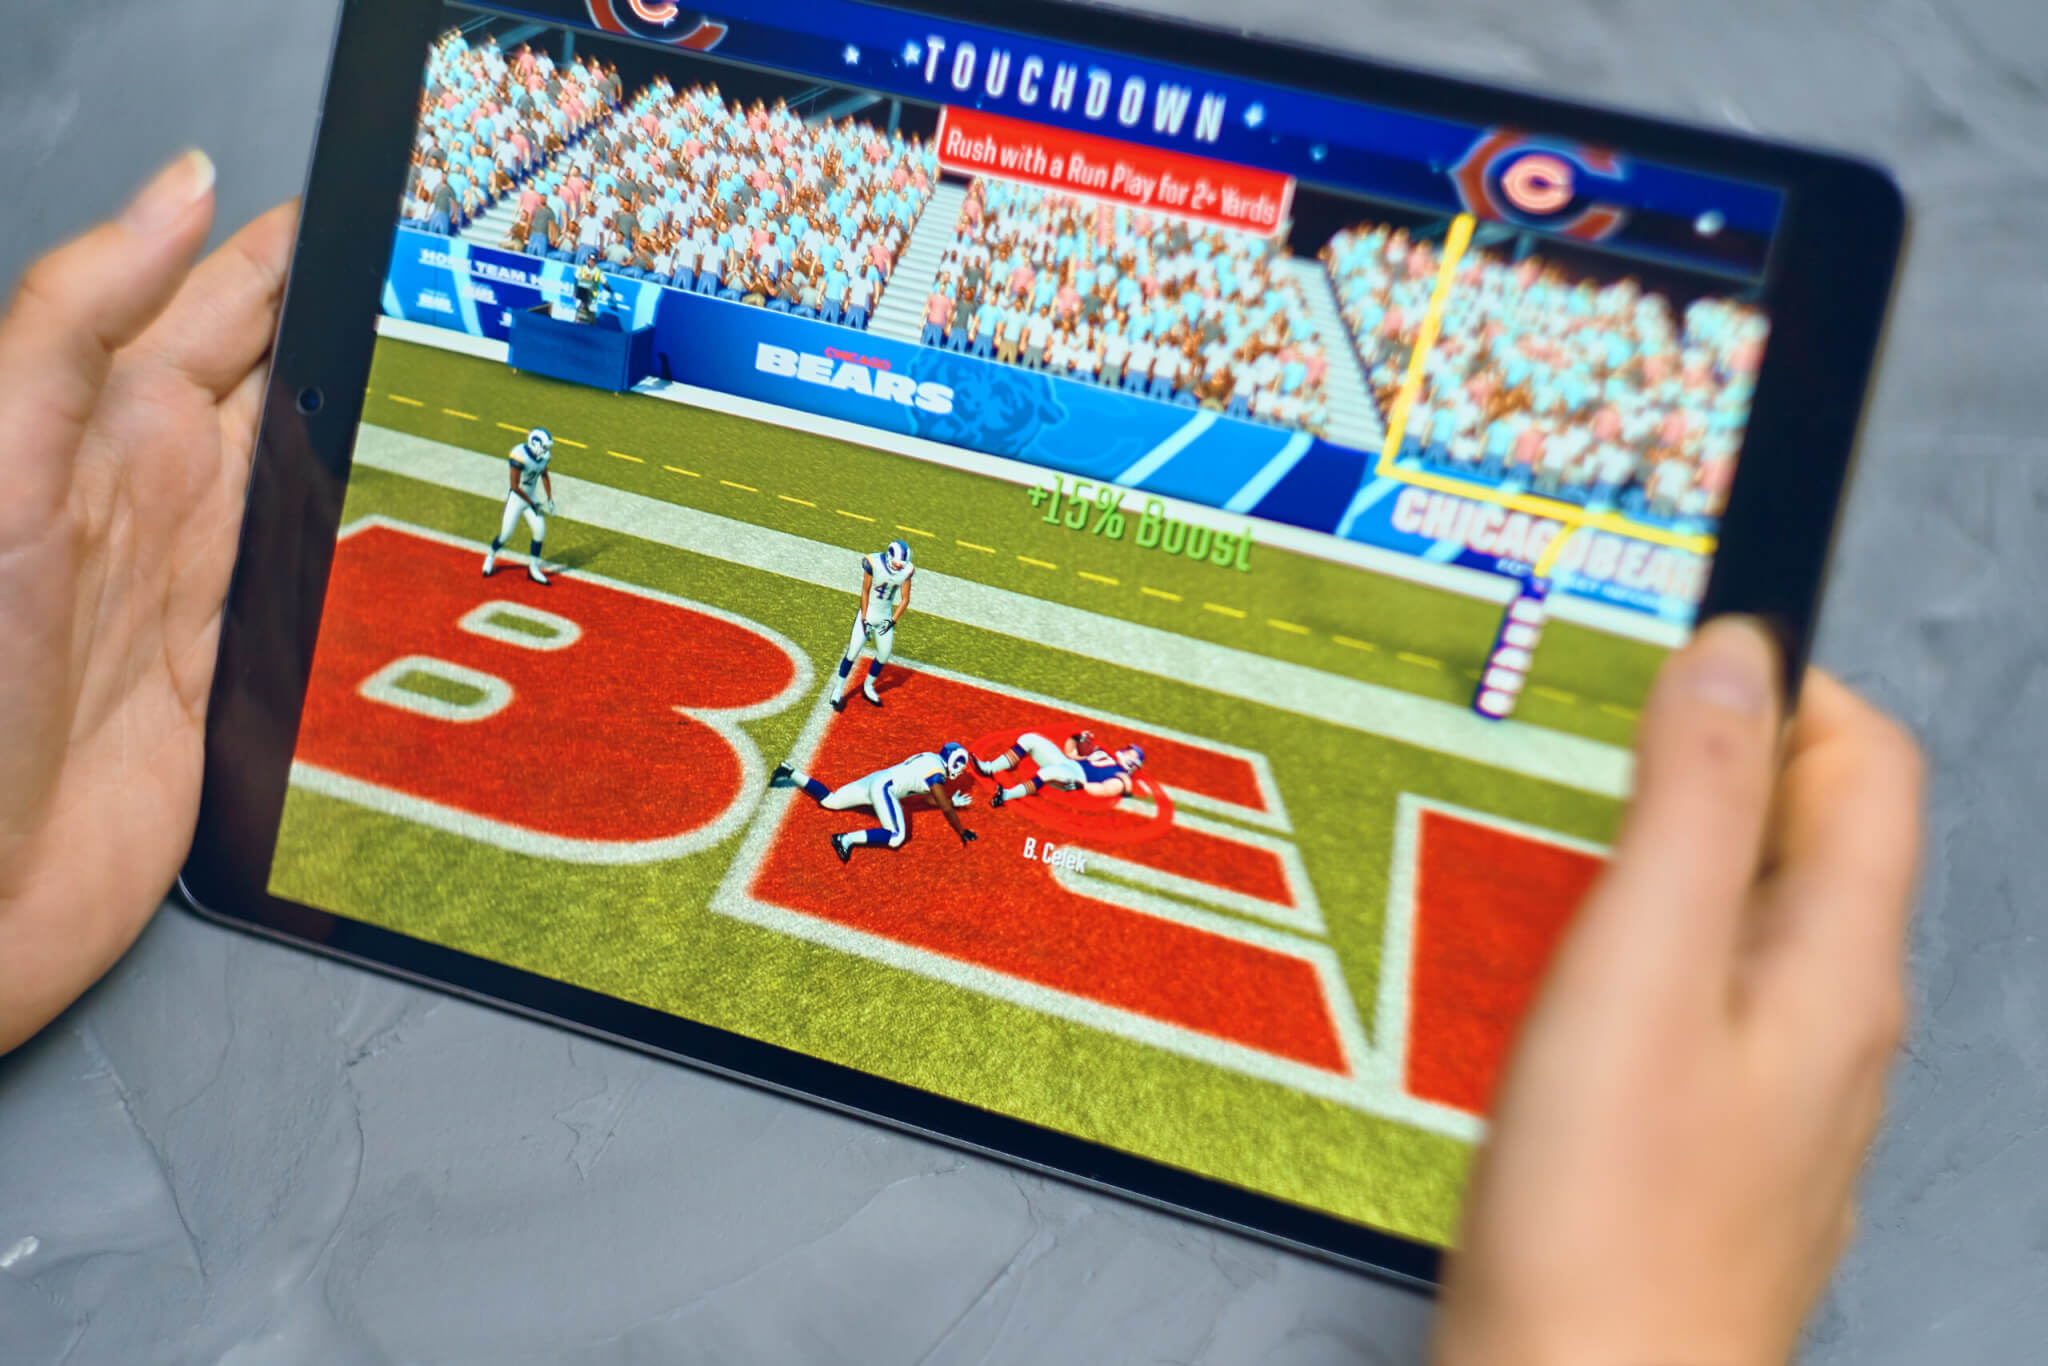 A Madden mobile game on a tablet